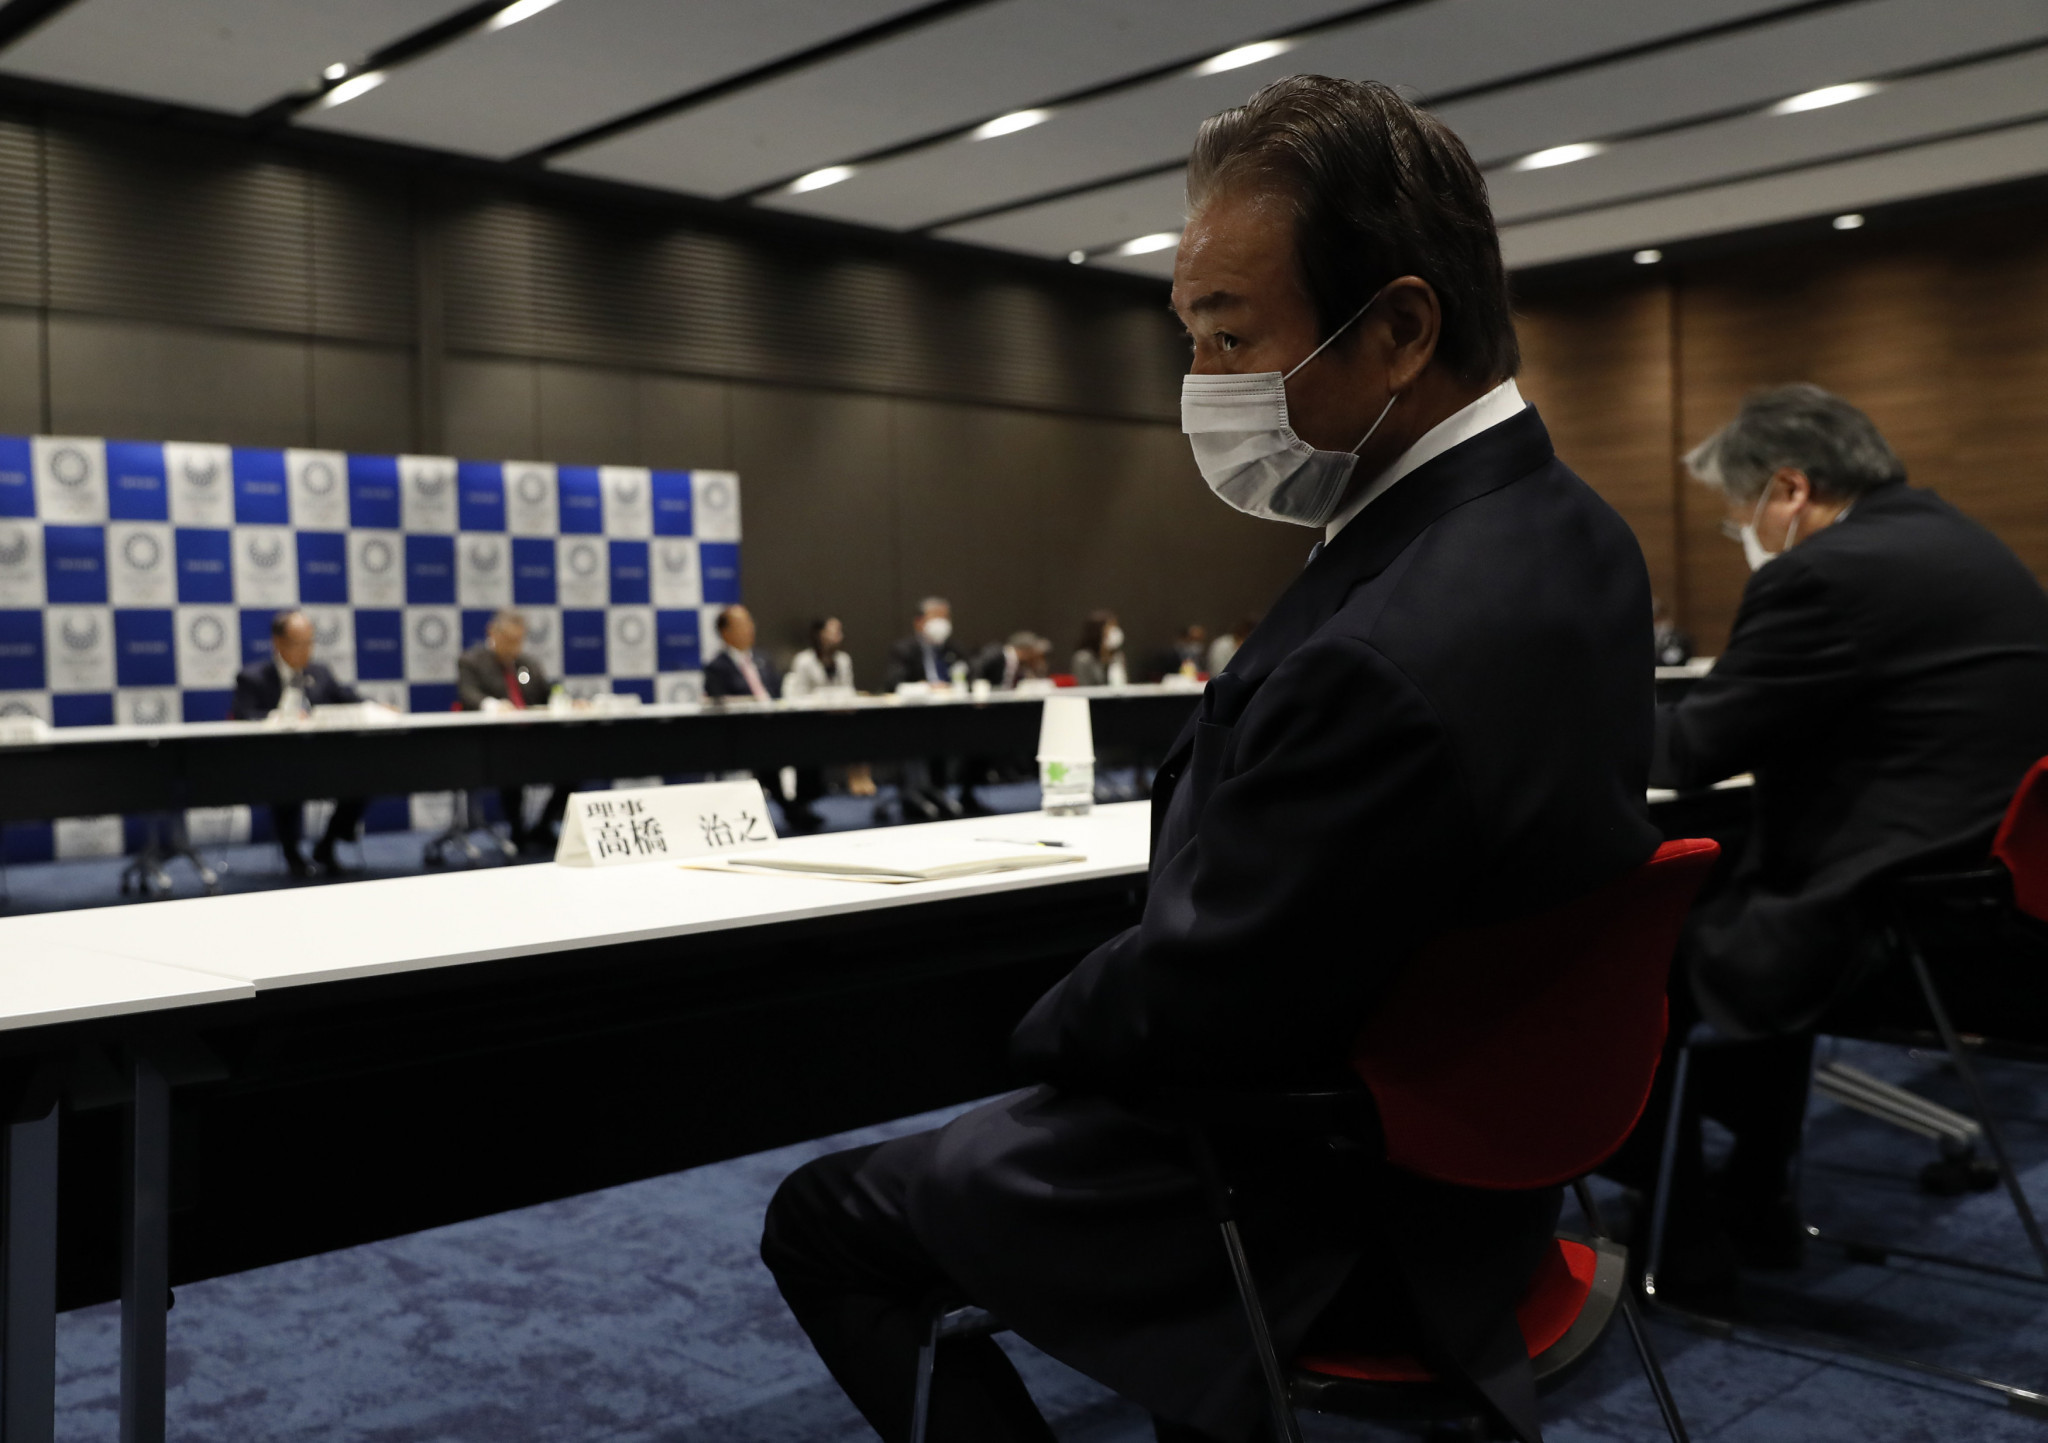 The home of Tokyo 2020 Executive Board member Haruyuki ©Getty ImagesTakahashi has been raided by prosecutors investigating allegations of bribery 